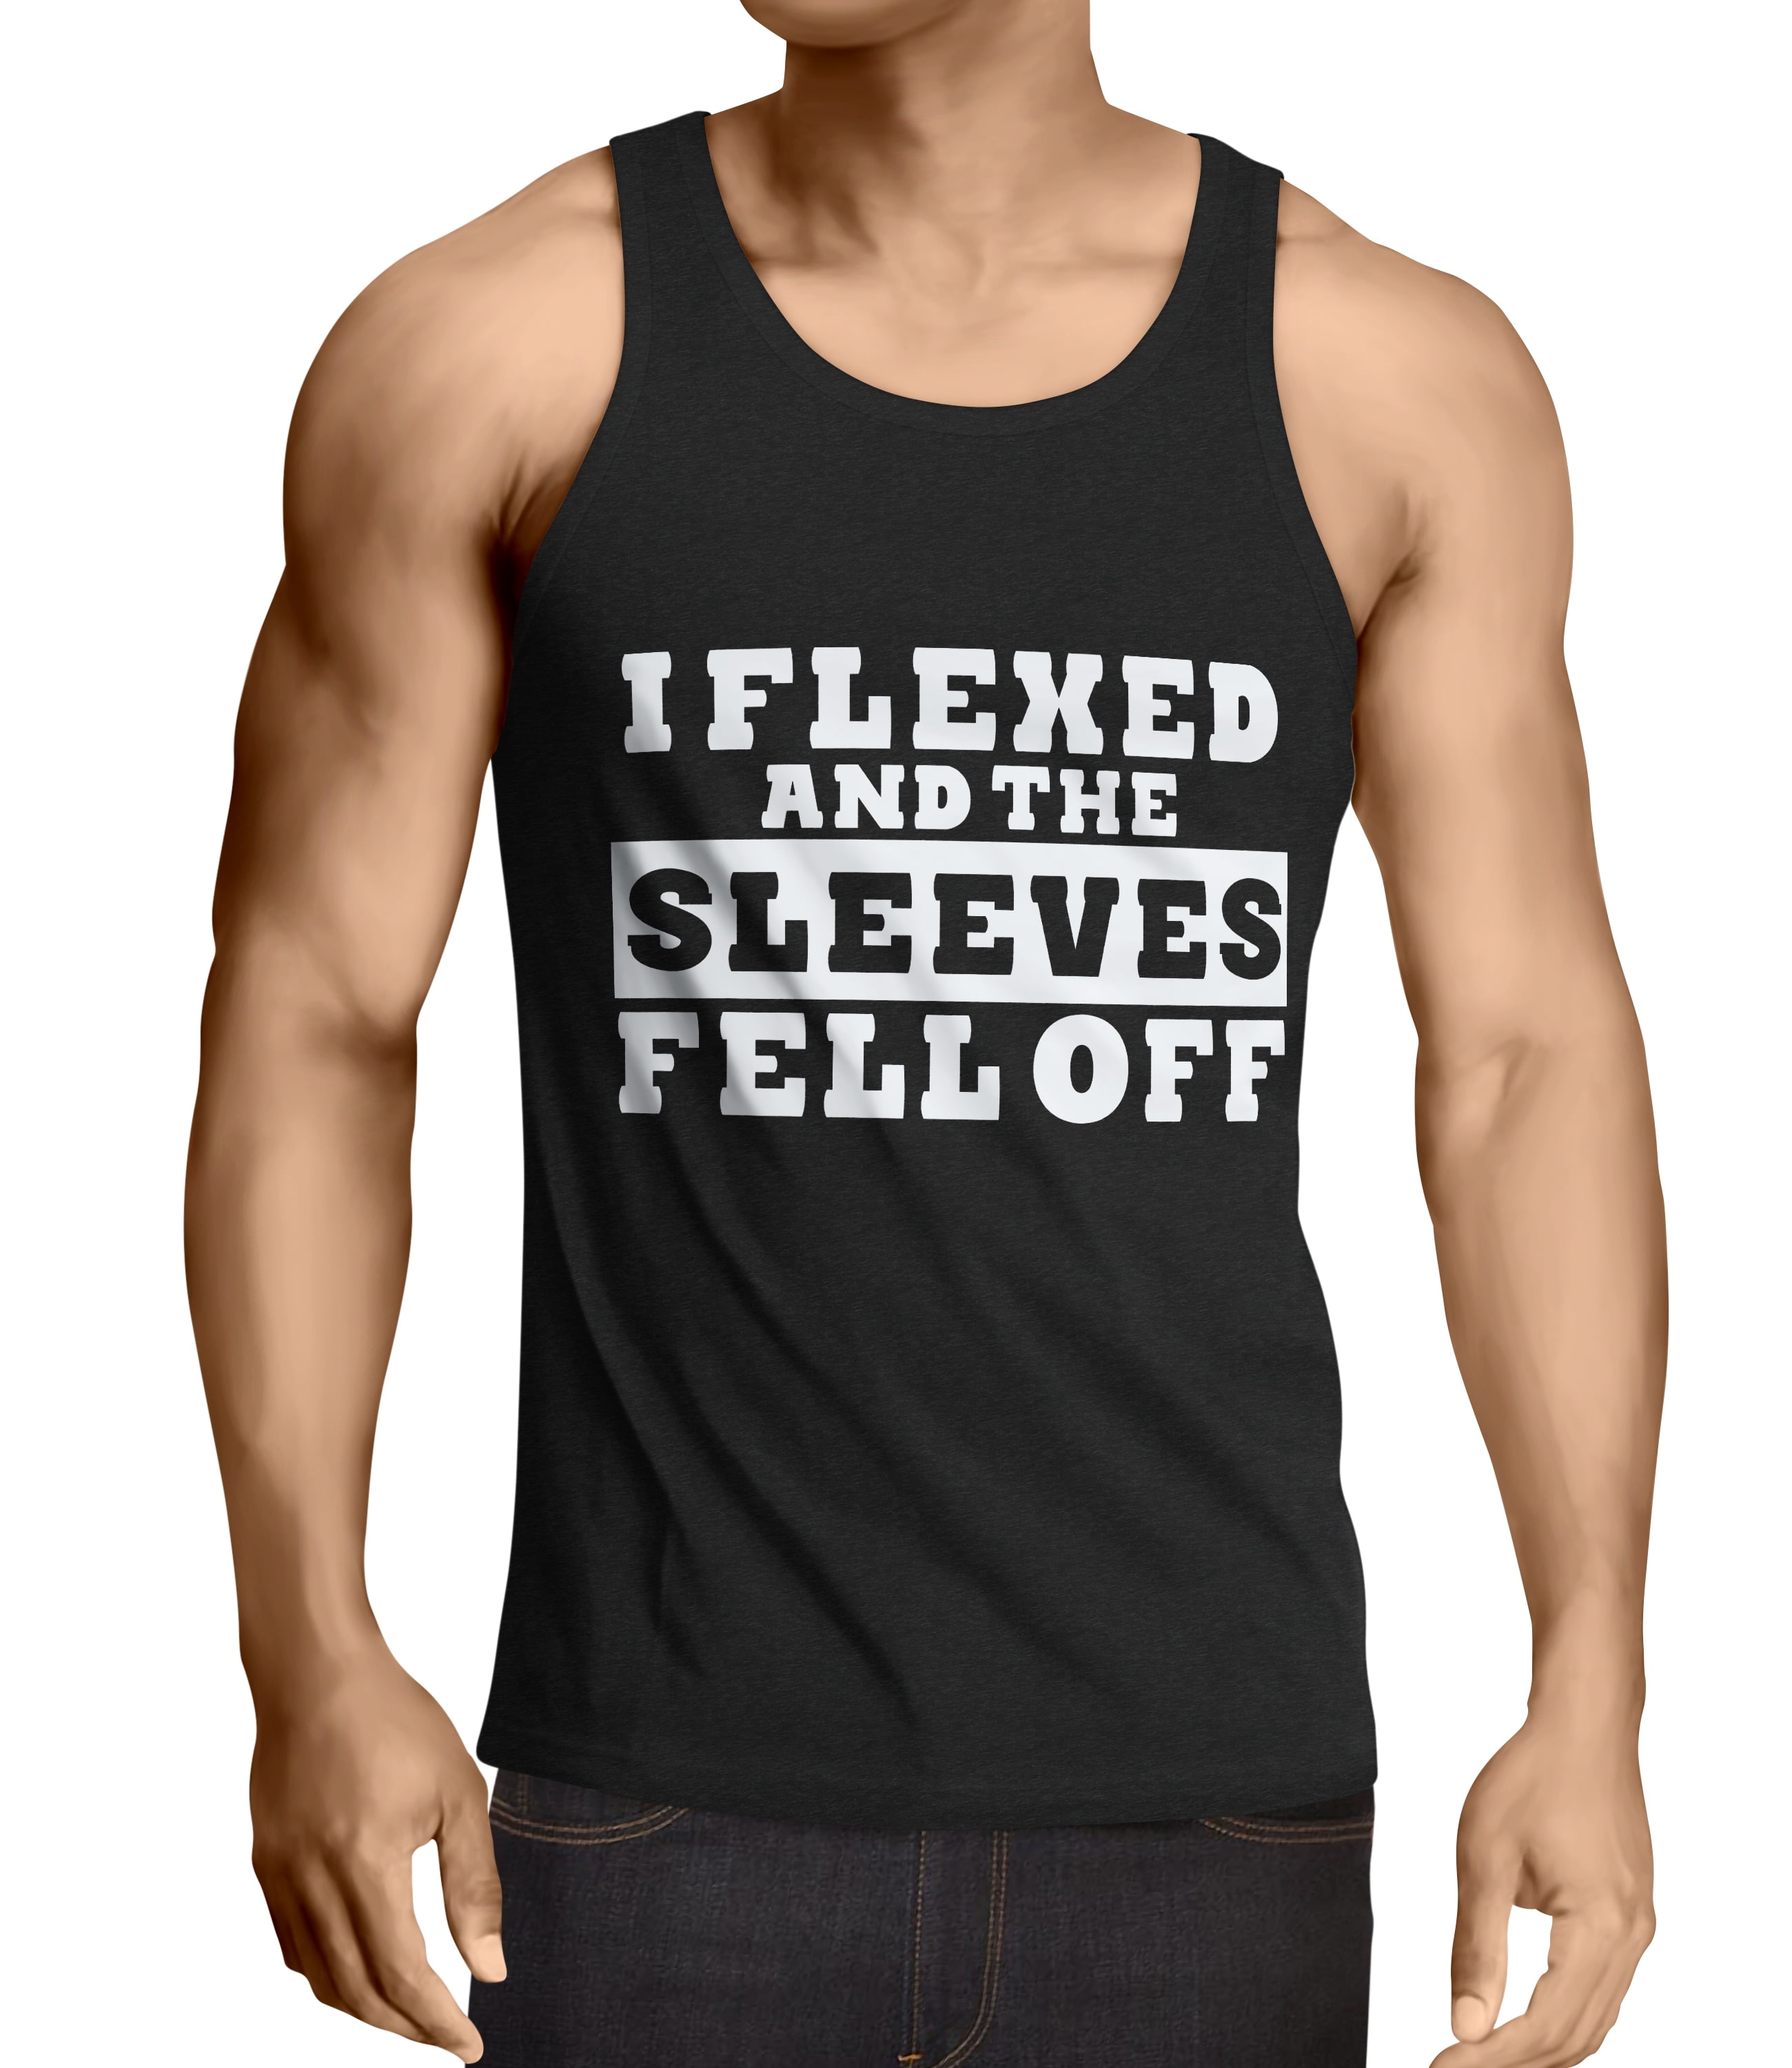 I Flexed and The Sleeves Fell Off Workout T-Shirt Bodybuilding Gym Tank Top